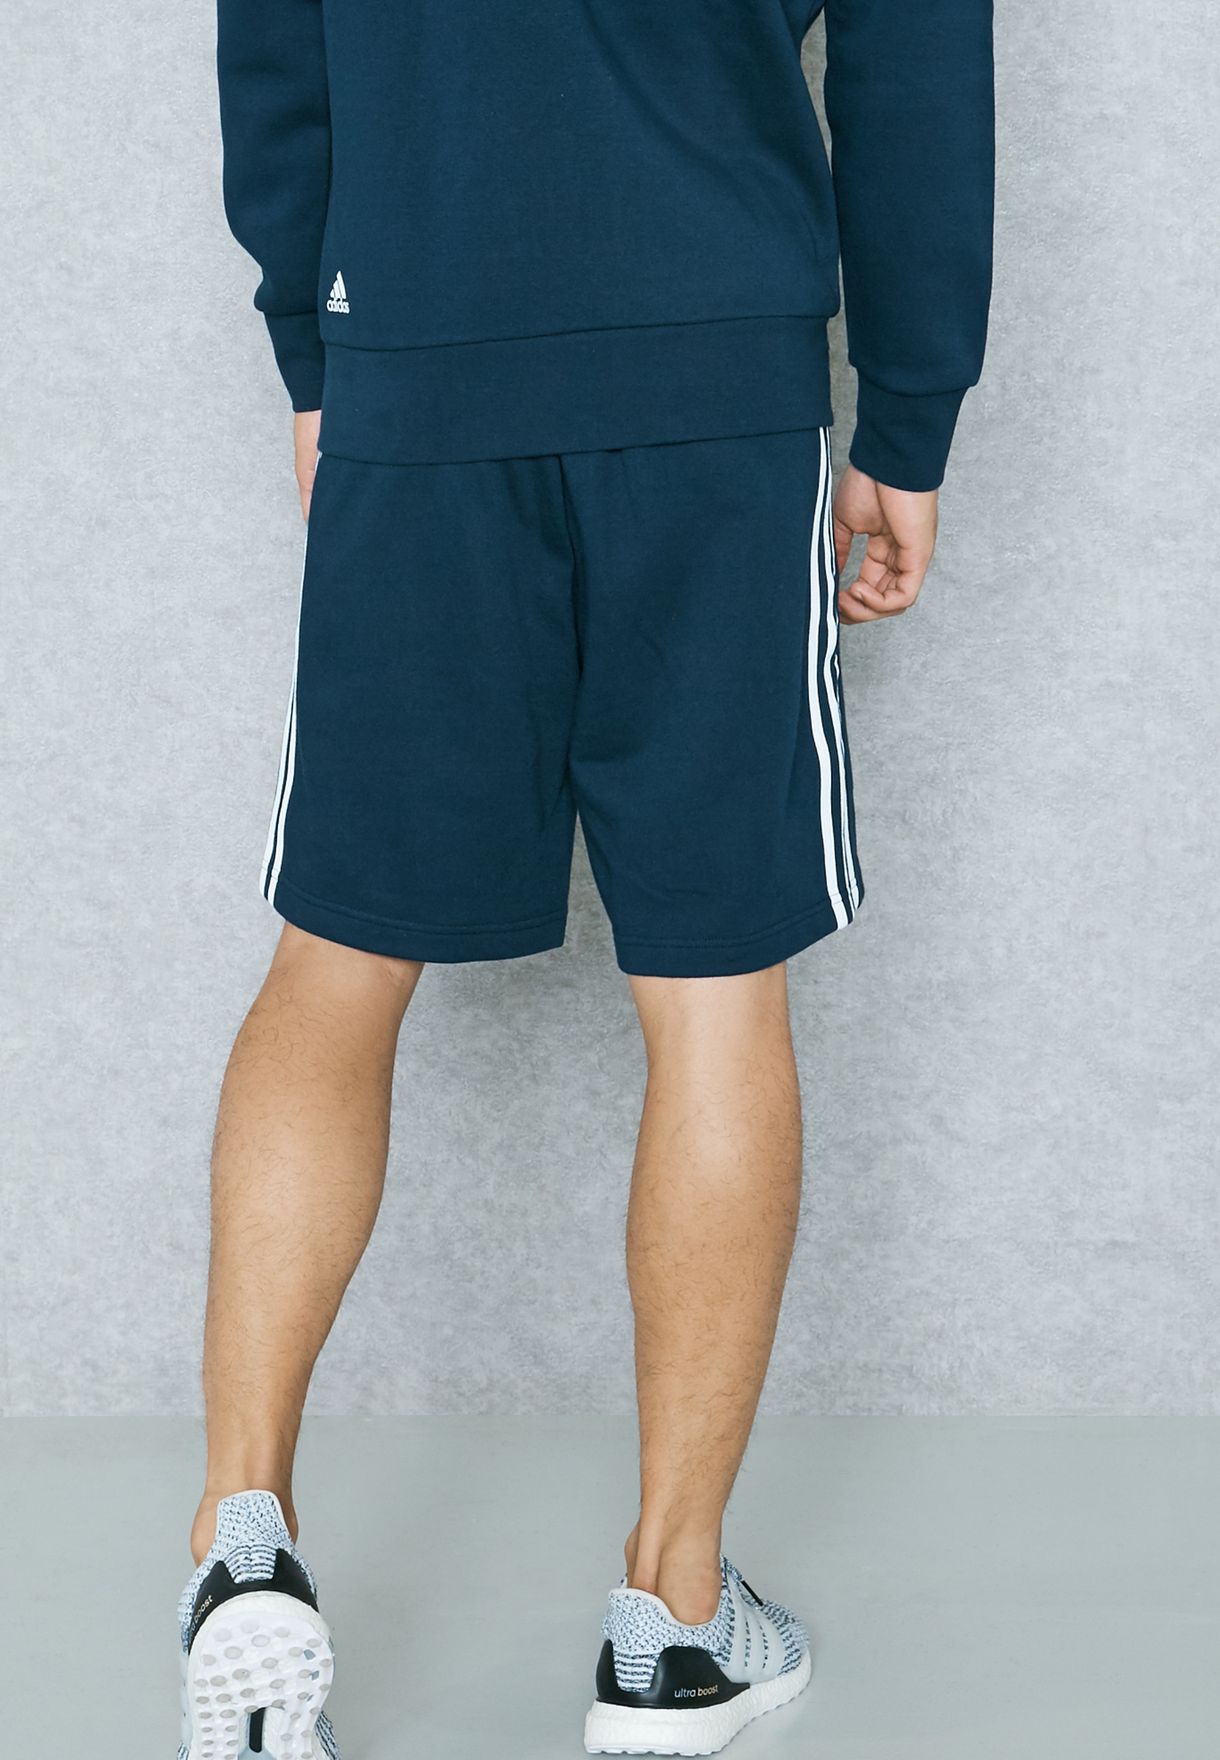 Positive Directly take a picture Buy adidas navy Essential 3 Stripe Shorts for Men in MENA, Worldwide